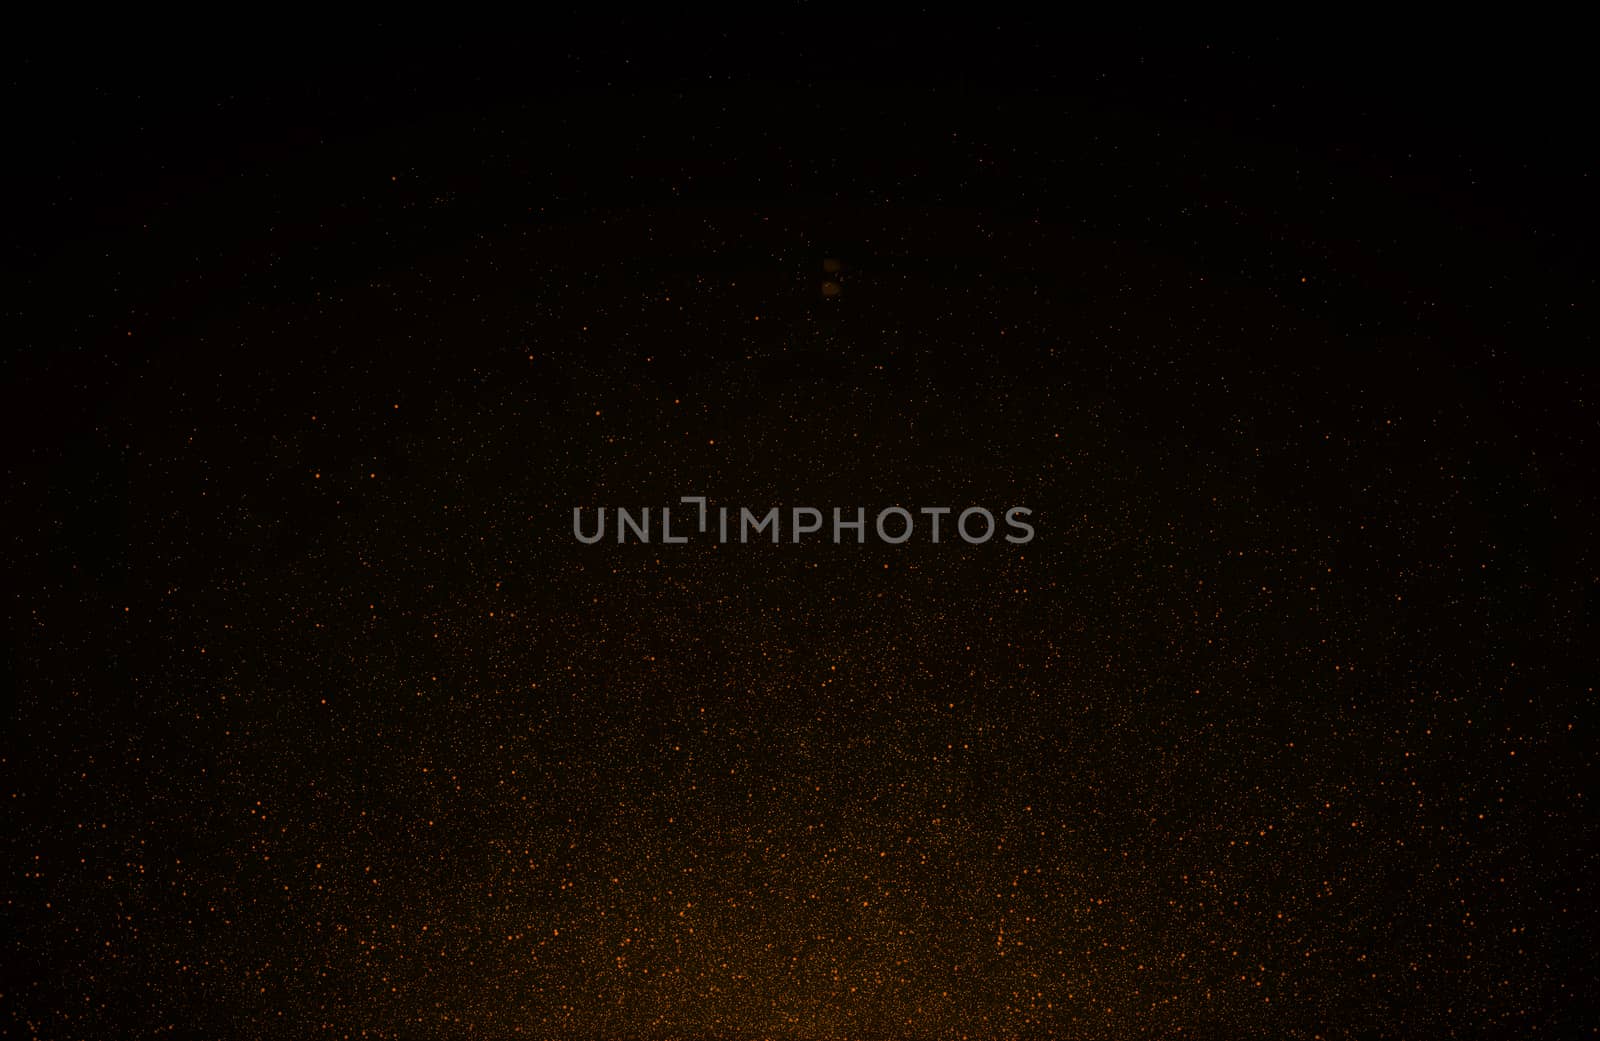 Abstract retro 1920 style vintage background of flickering gold tone particles and light flare